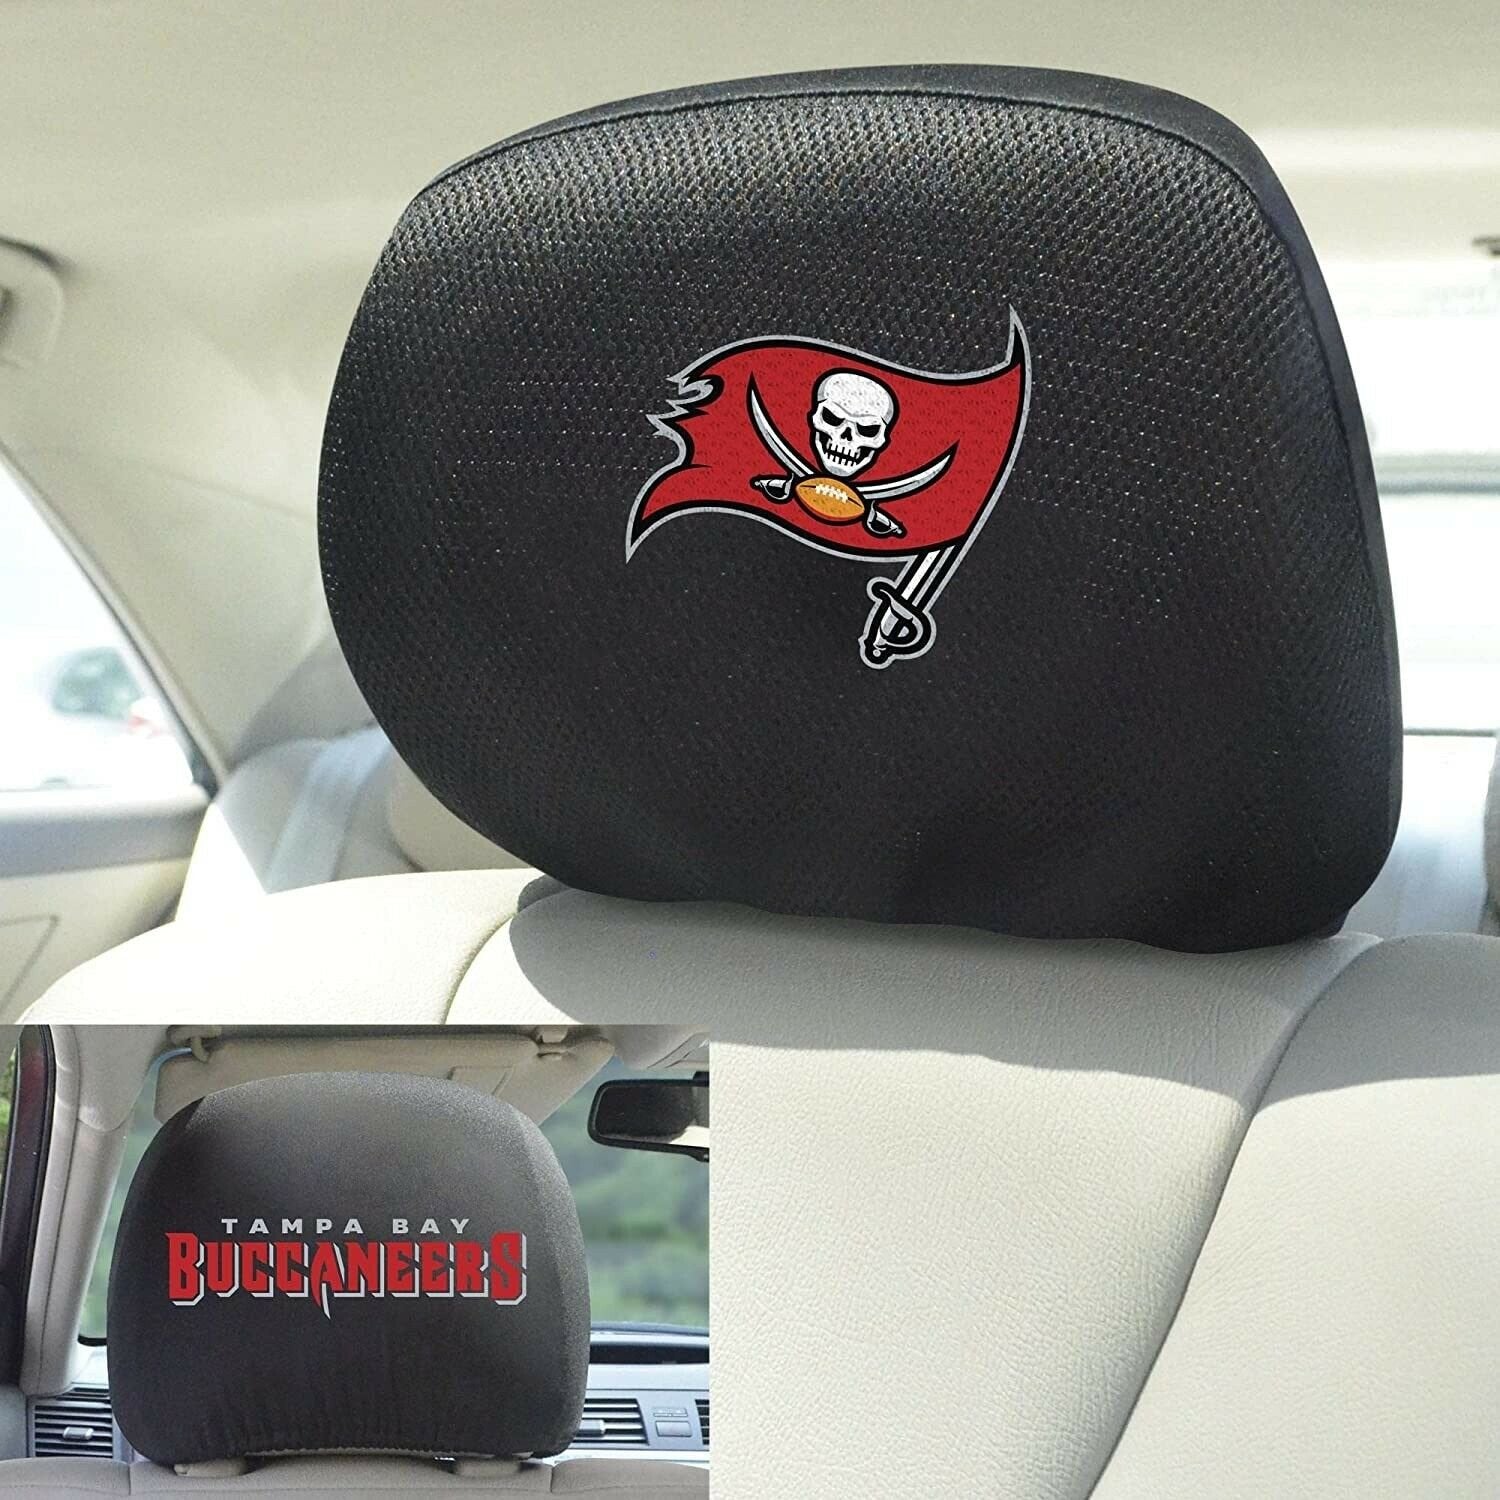 Tampa Bay Buccaneers Pair of Premium Auto Head Rest Covers, Embroidered, Black Elastic, 14x10 Inch